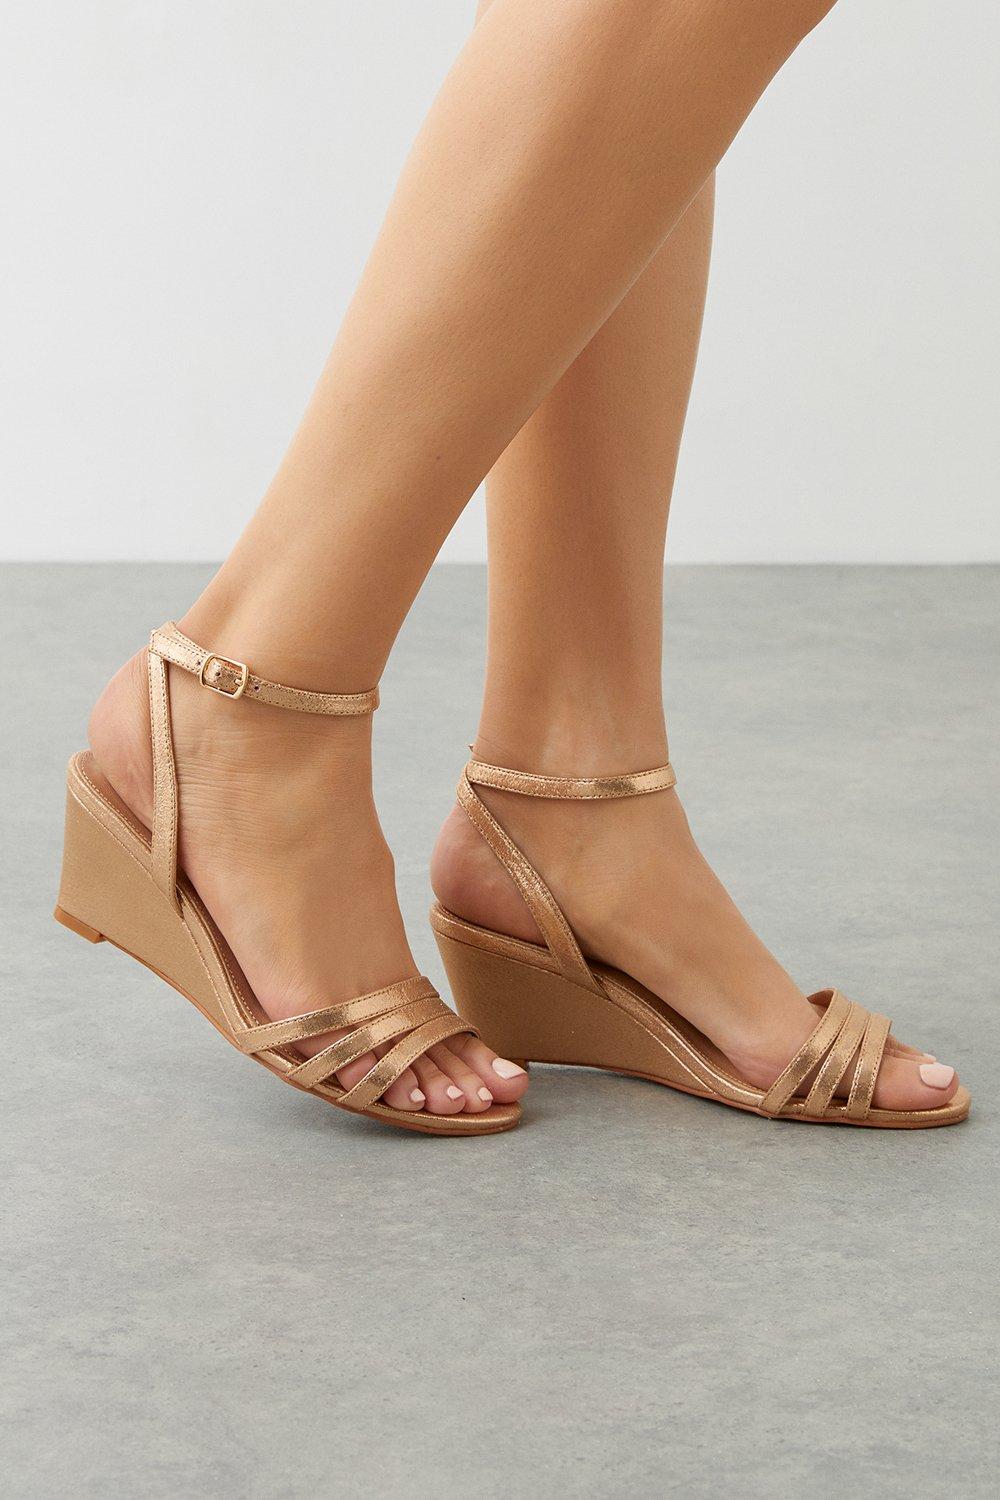 Women’s Good For The Sole: Wide Fit Angelina Wedge Heel Sandals - rose gold - 5